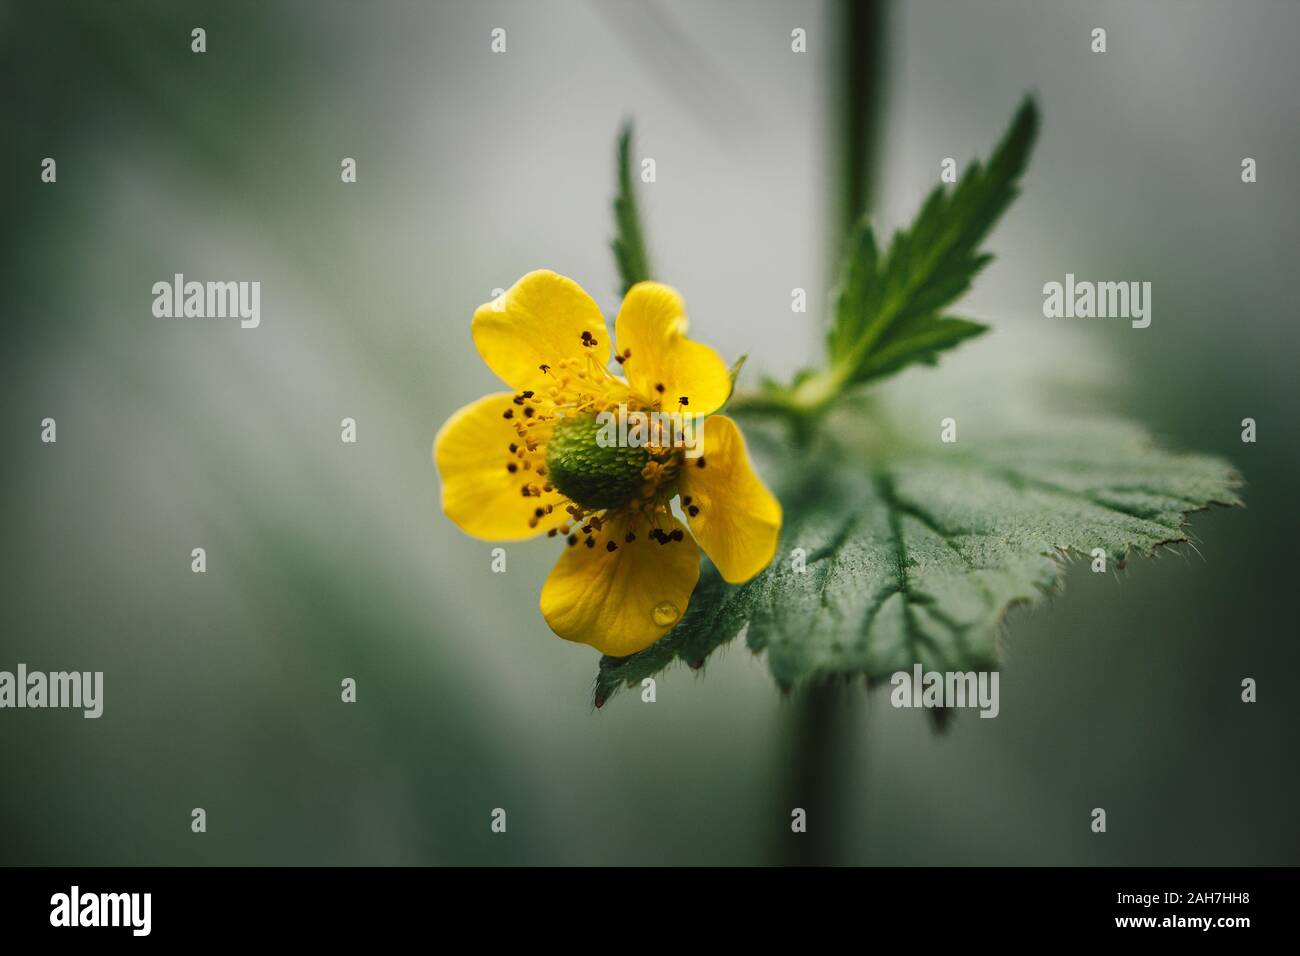 Yellow flower on green blurred background. Cinquefoil or potentilla. Side view, close-up macro. Wild flower in the meadow. Stock Photo